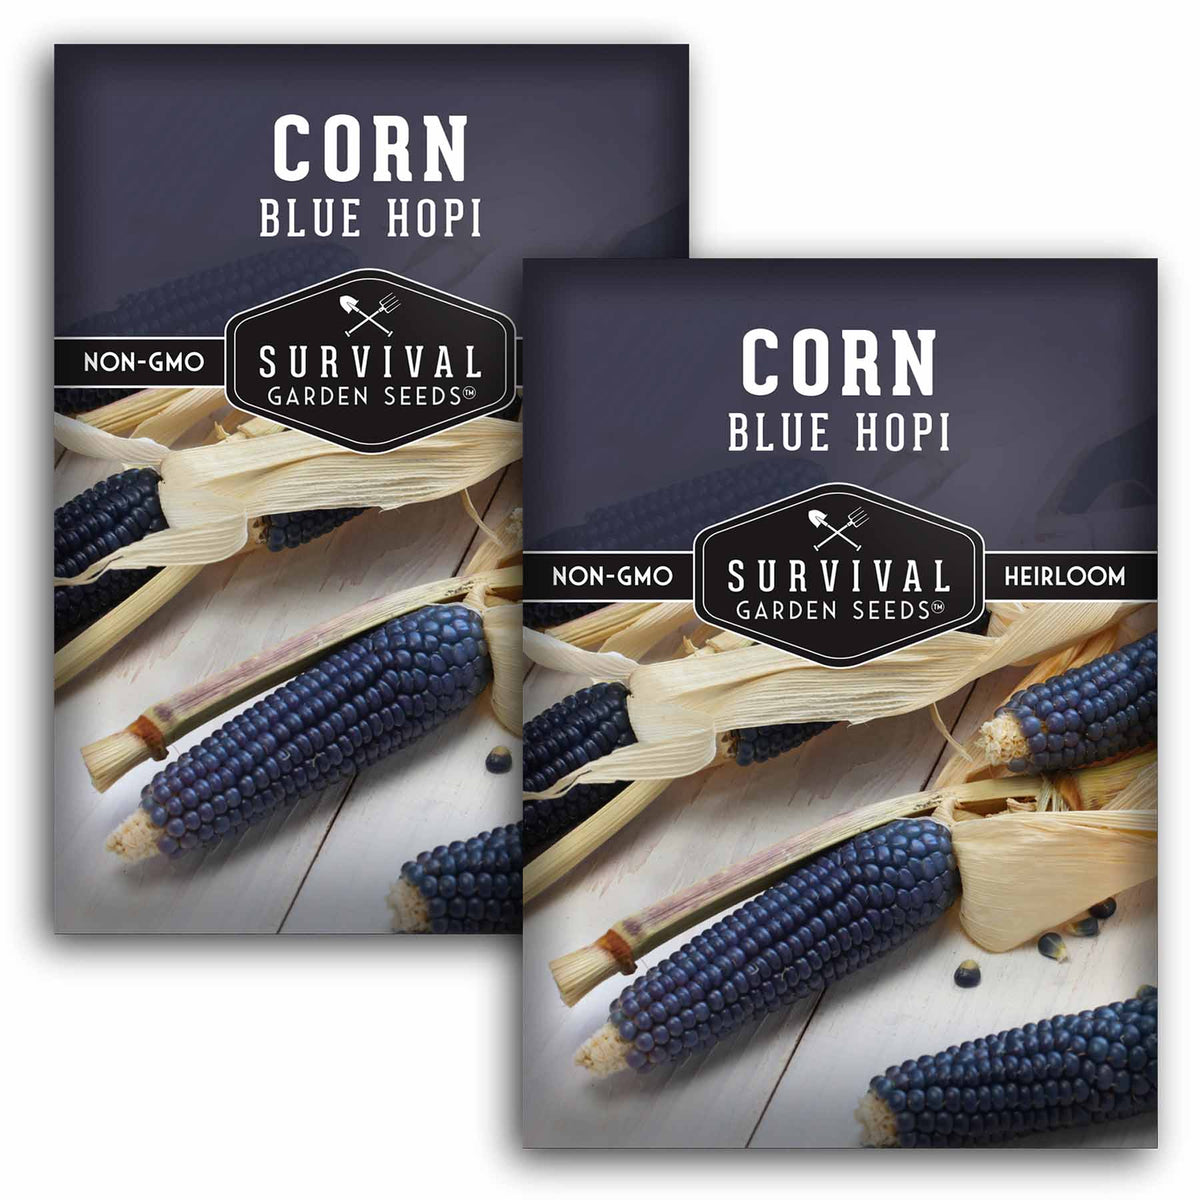 2 packets of Blue Hope Corn seeds